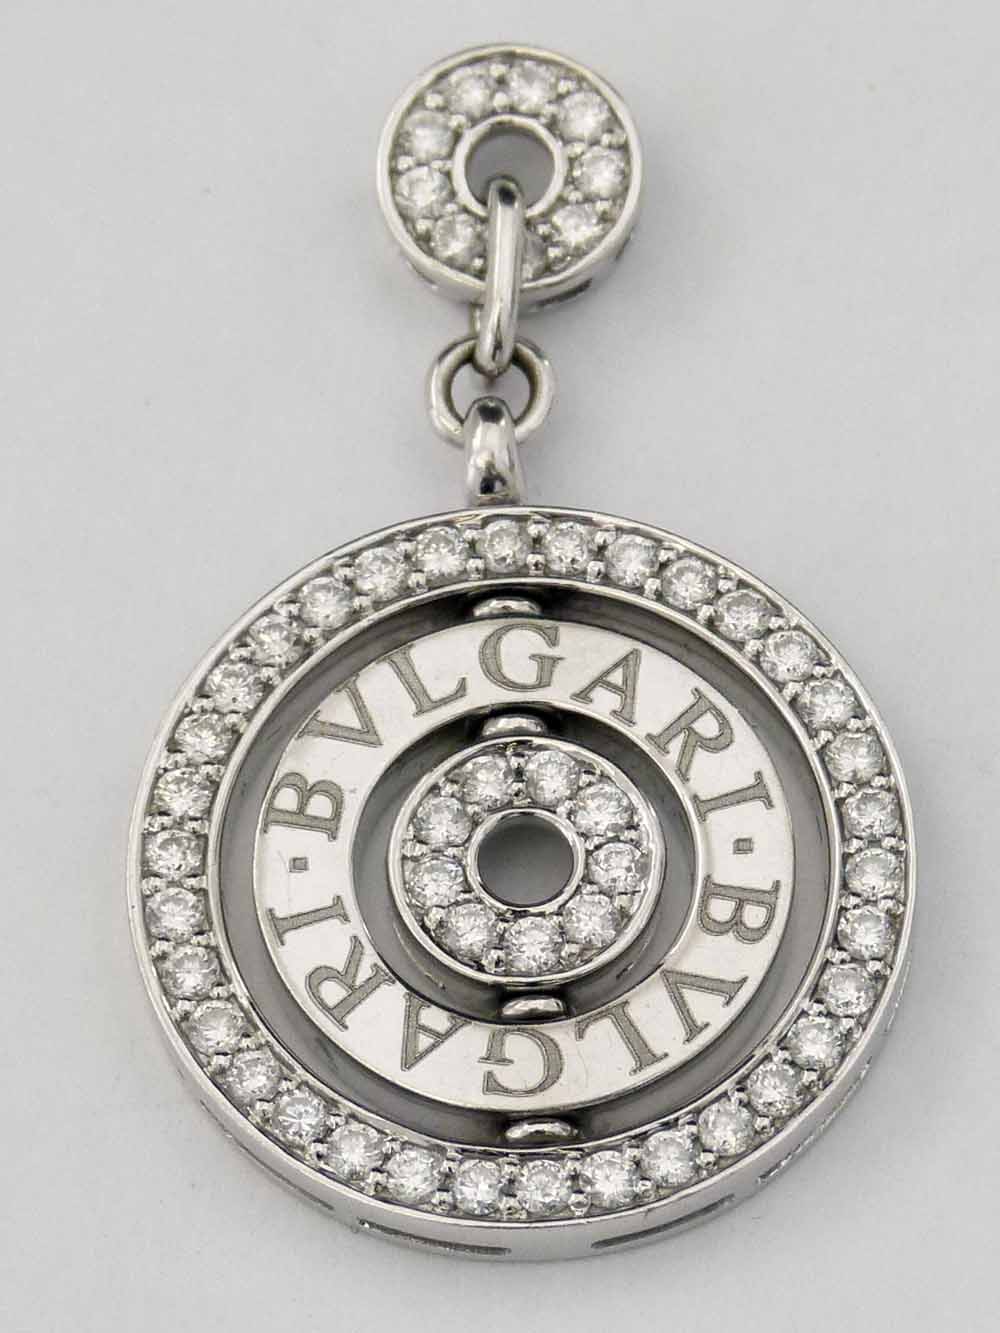 Target pendant set with concentric bands of diamonds and a central rotating ring engraved "